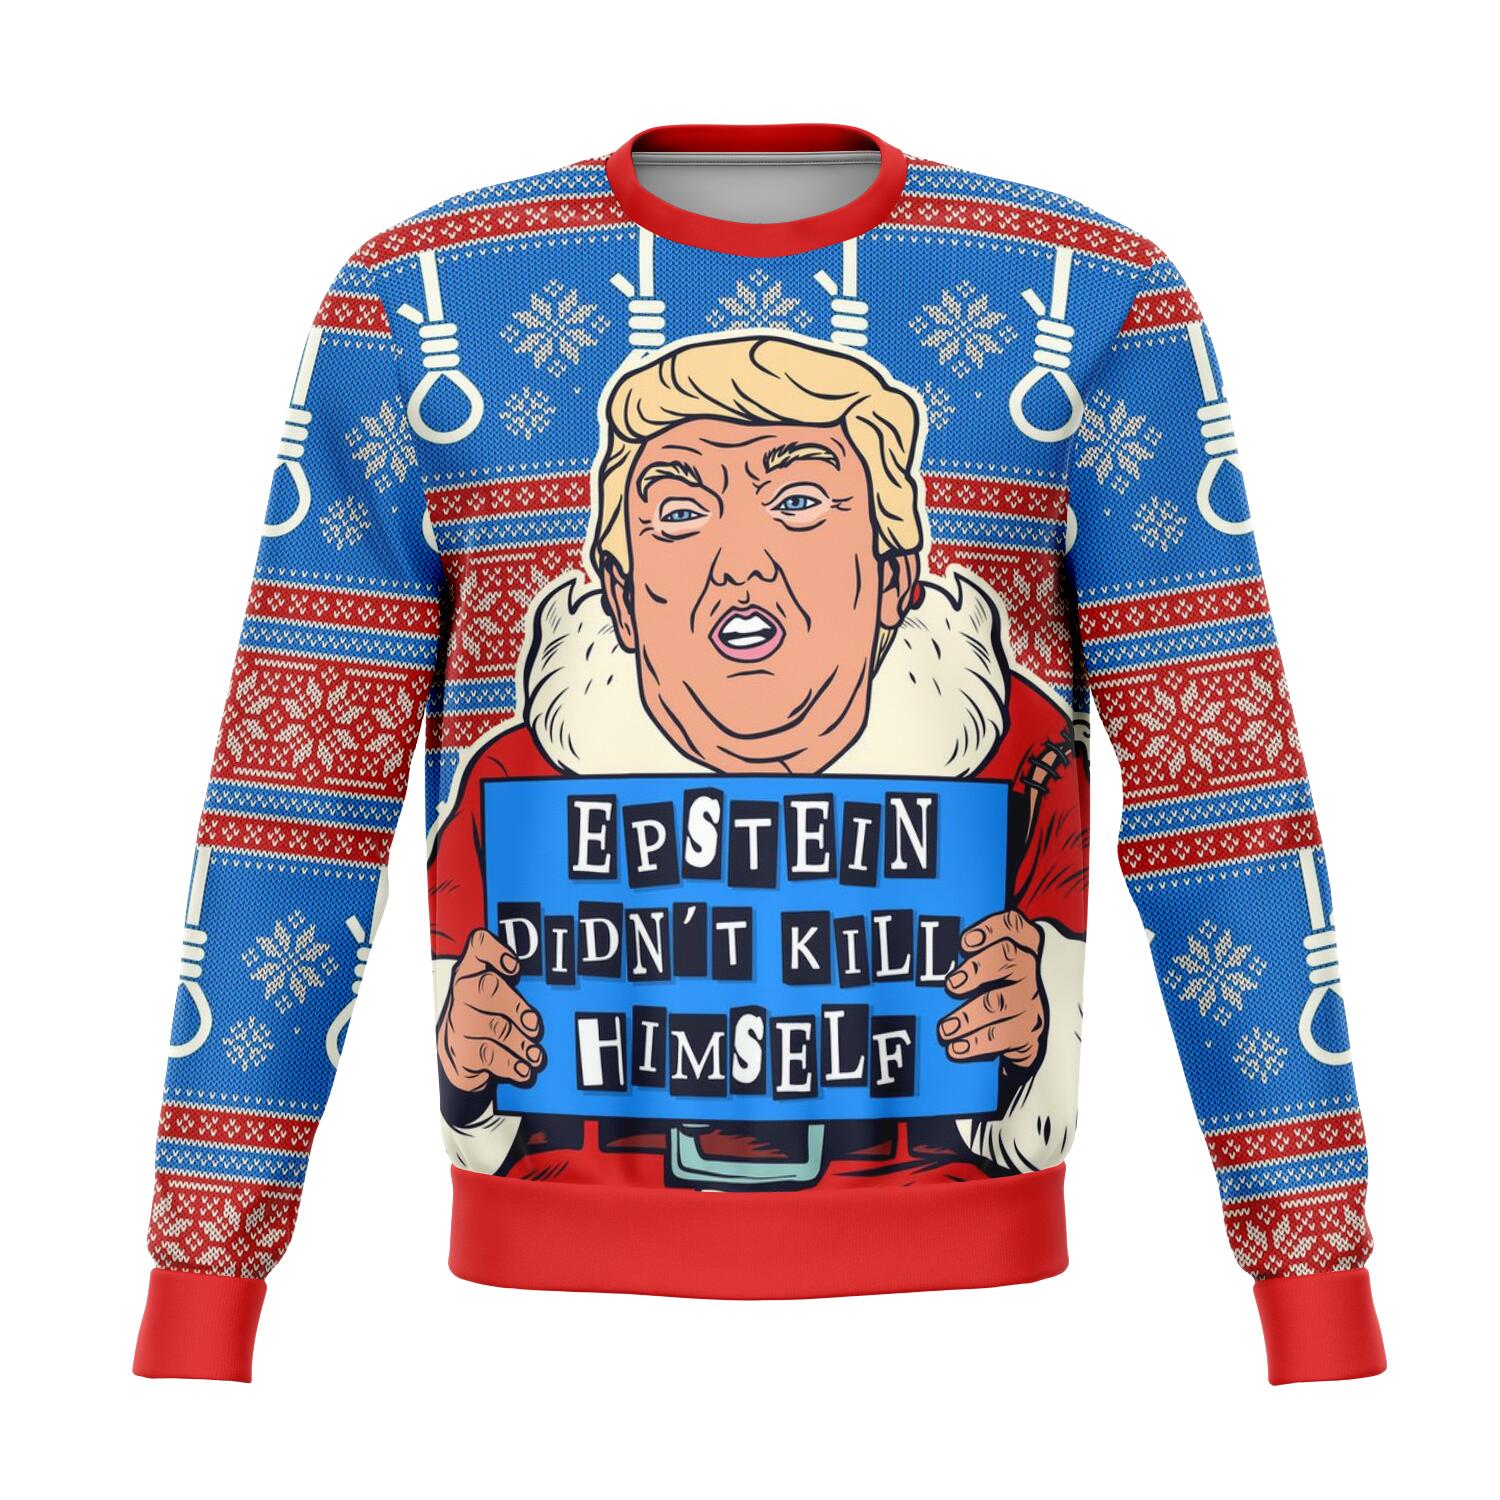 dybde Ydmyge navn Epstein Didn't Kill Himself Trump Ugly Christmas Sweater Order By December  5 | Powderaddicts